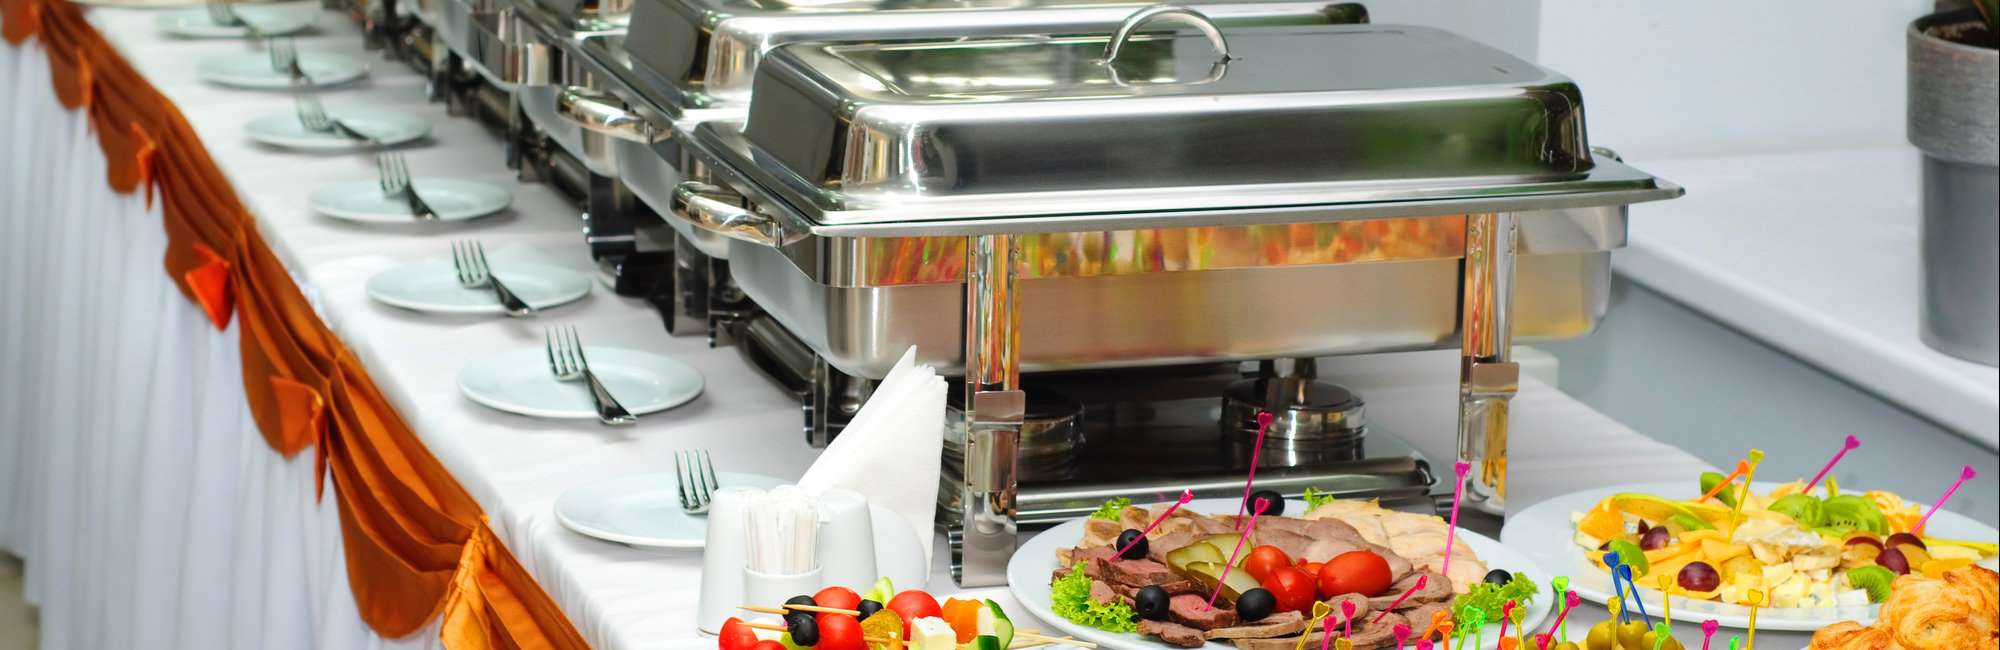 Brainerd MN Father's Day Meals & Specials - Brunchs & Buffets - Dining